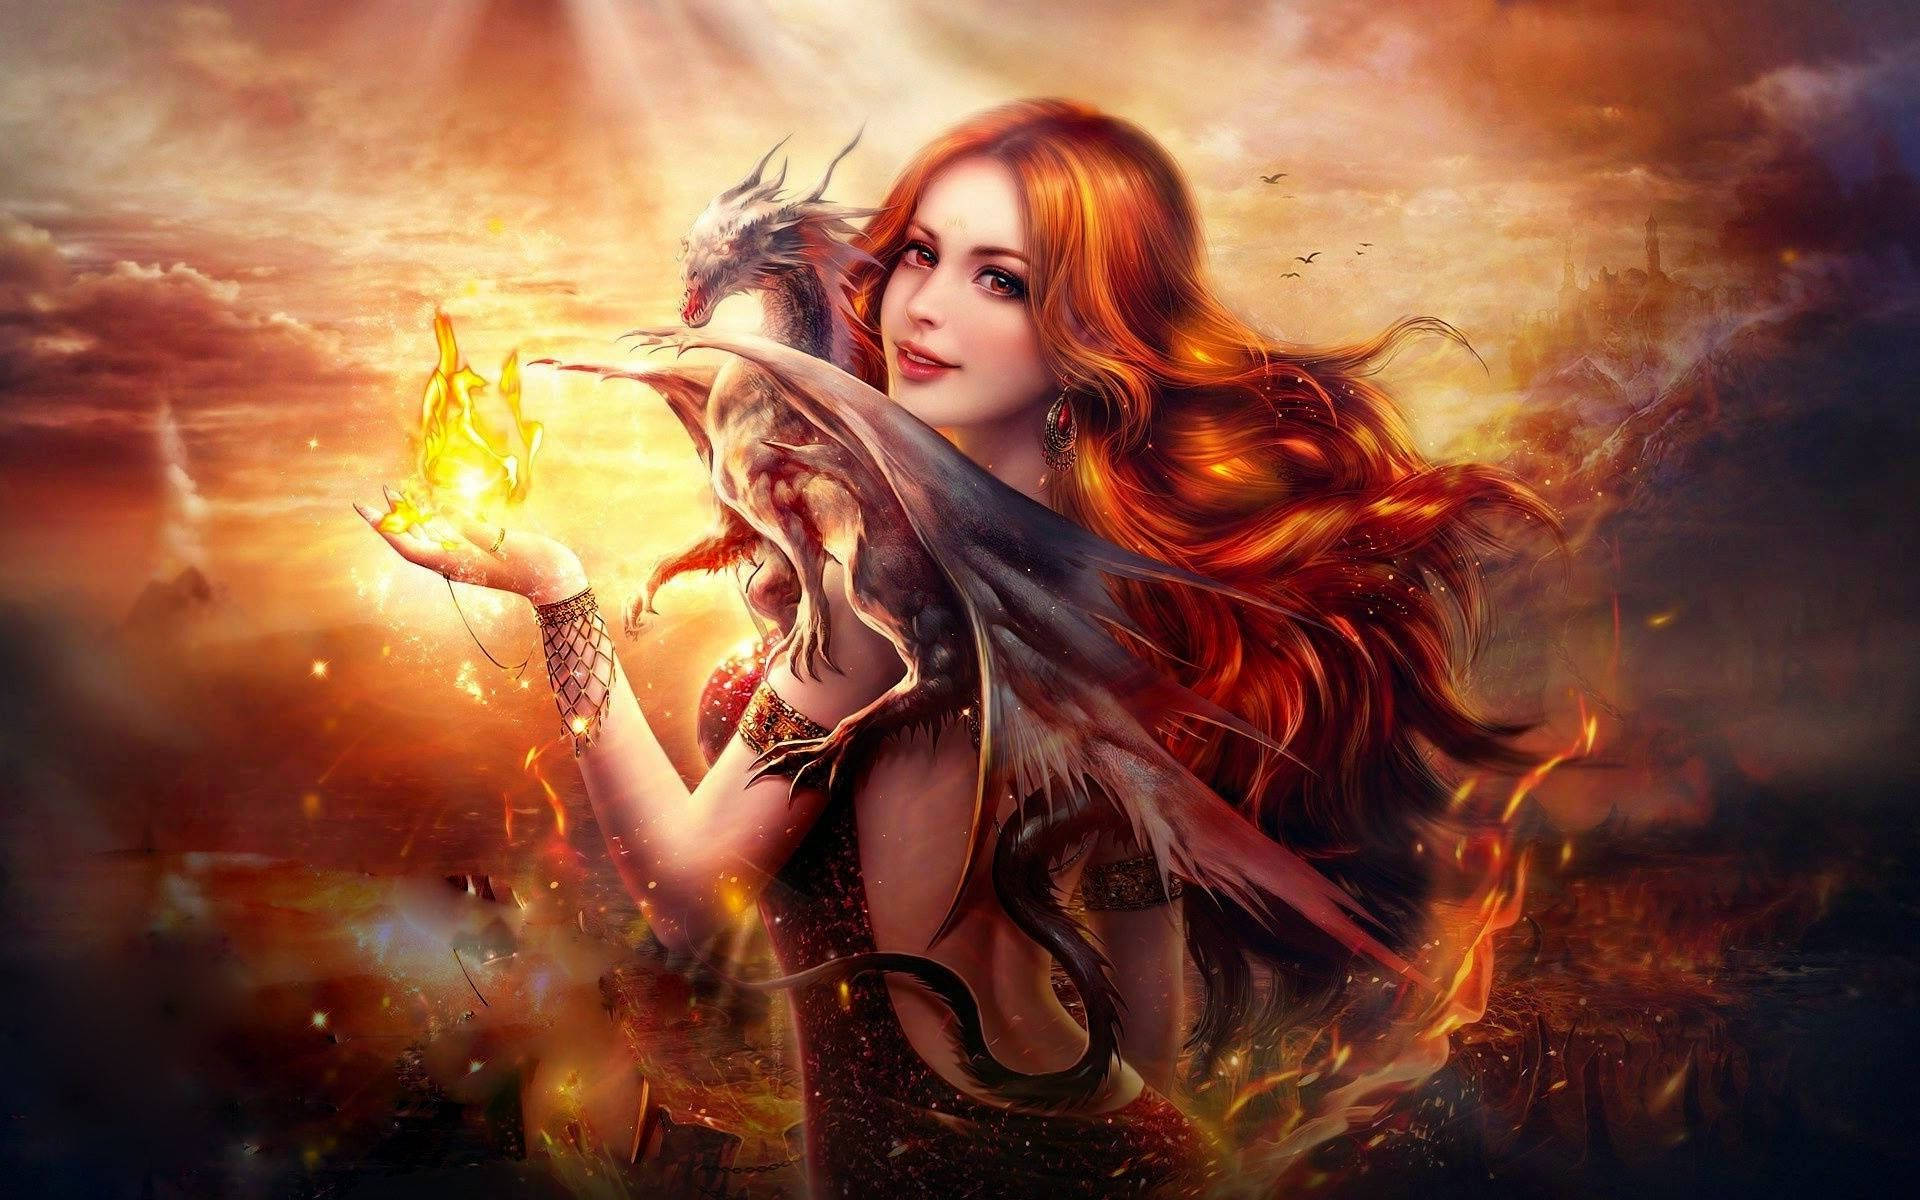 Daring Adventure - A Fantasy Girl Tries Her Hand At Fire-breathing Background